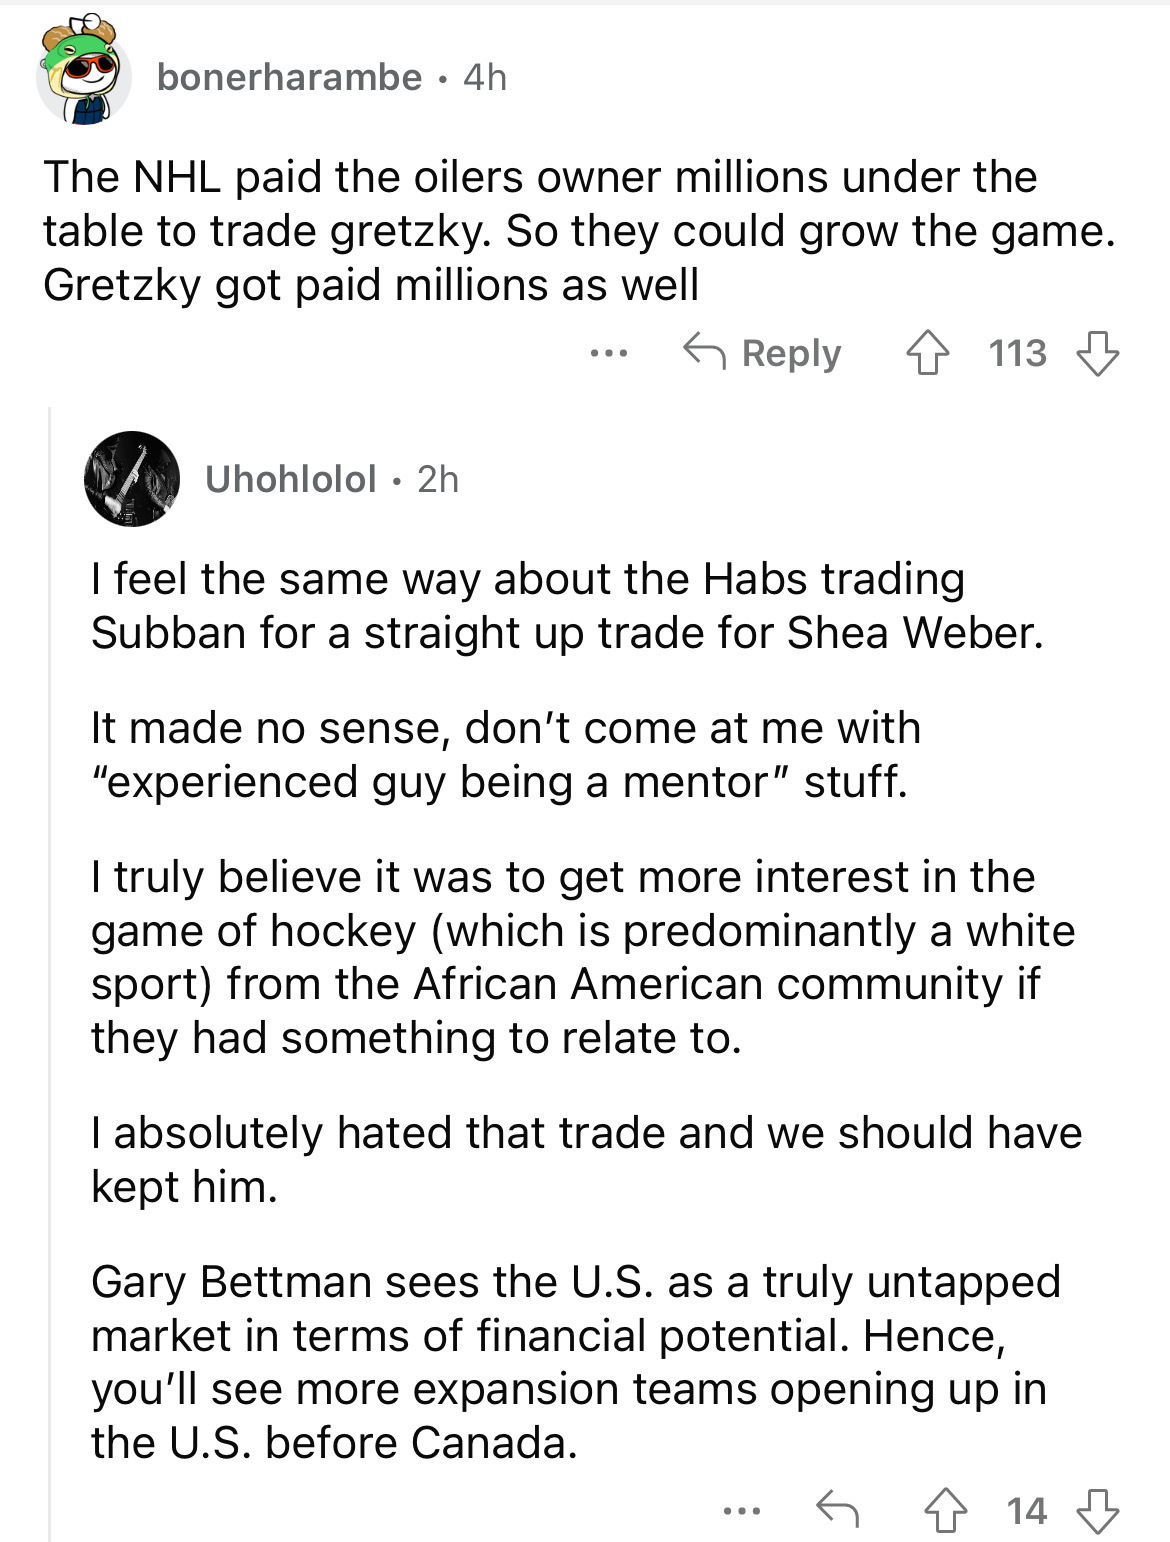 document - bonerharambe 4h The Nhl paid the oilers owner millions under the table to trade gretzky. So they could grow the game. Gretzky got paid millions as well Uhohlolol 2h ... 113 I feel the same way about the Habs trading Subban for a straight up tra